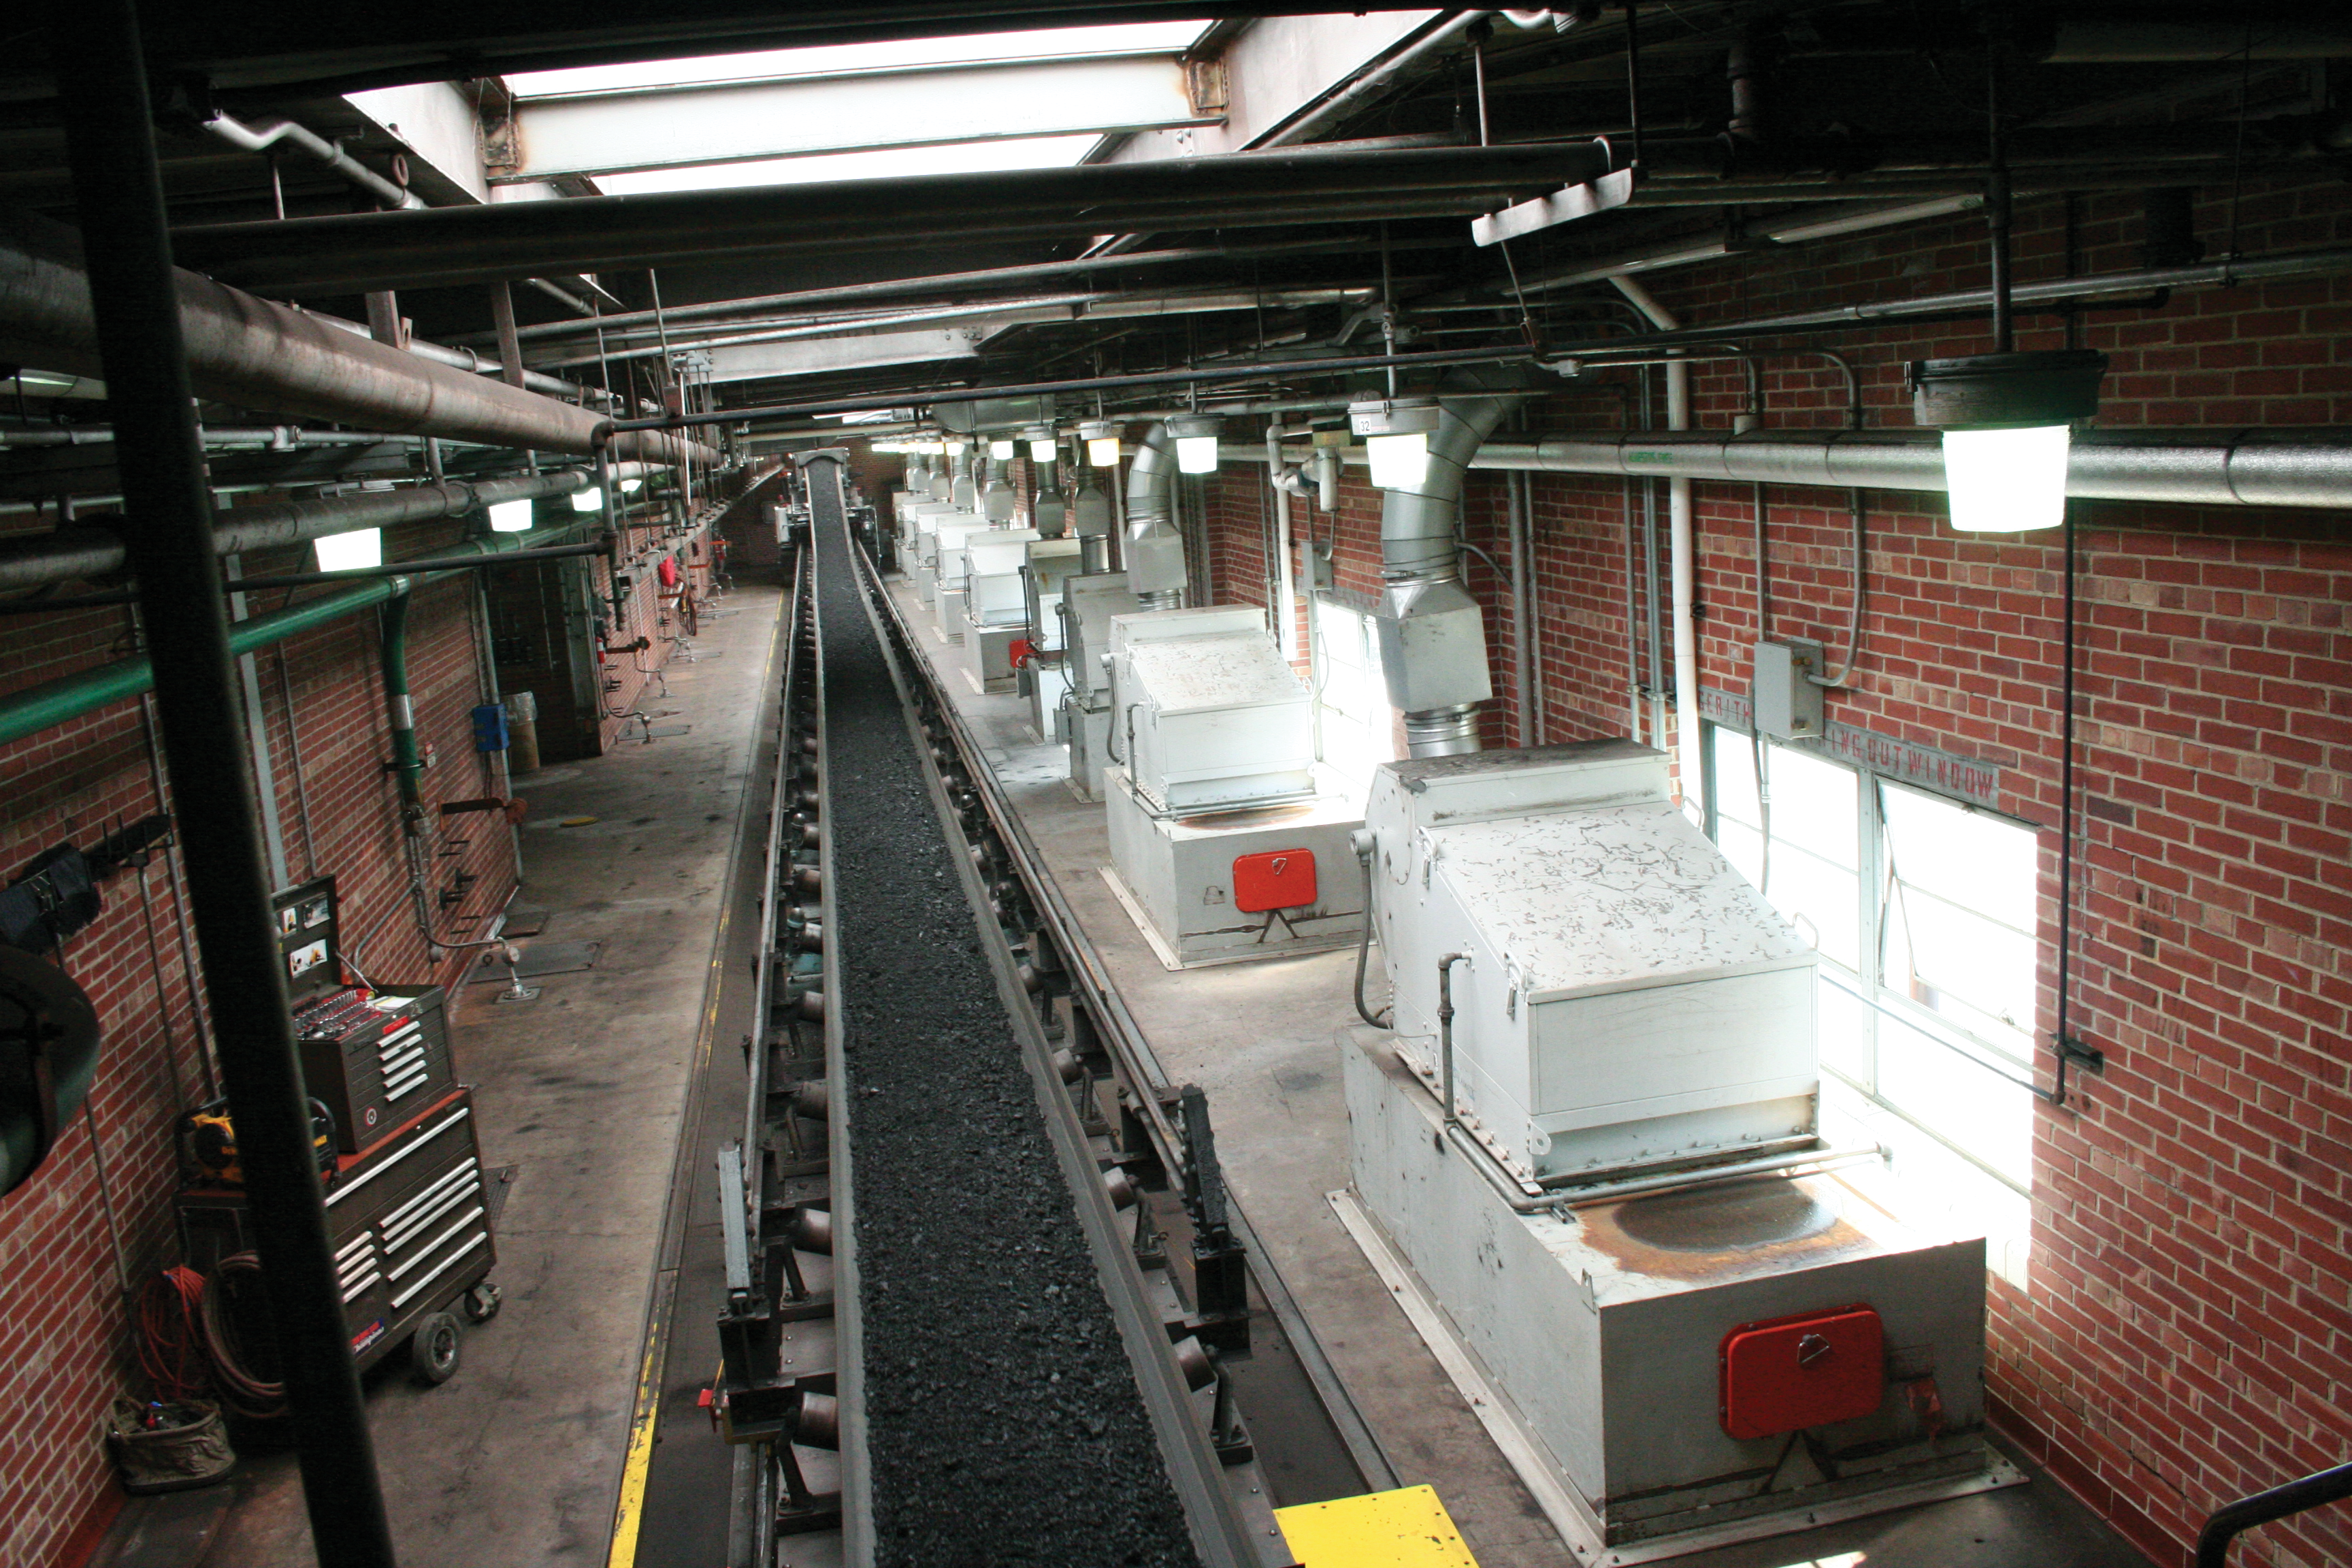 Several dust collectors are lined up in row on a tripper floor of a power plant.